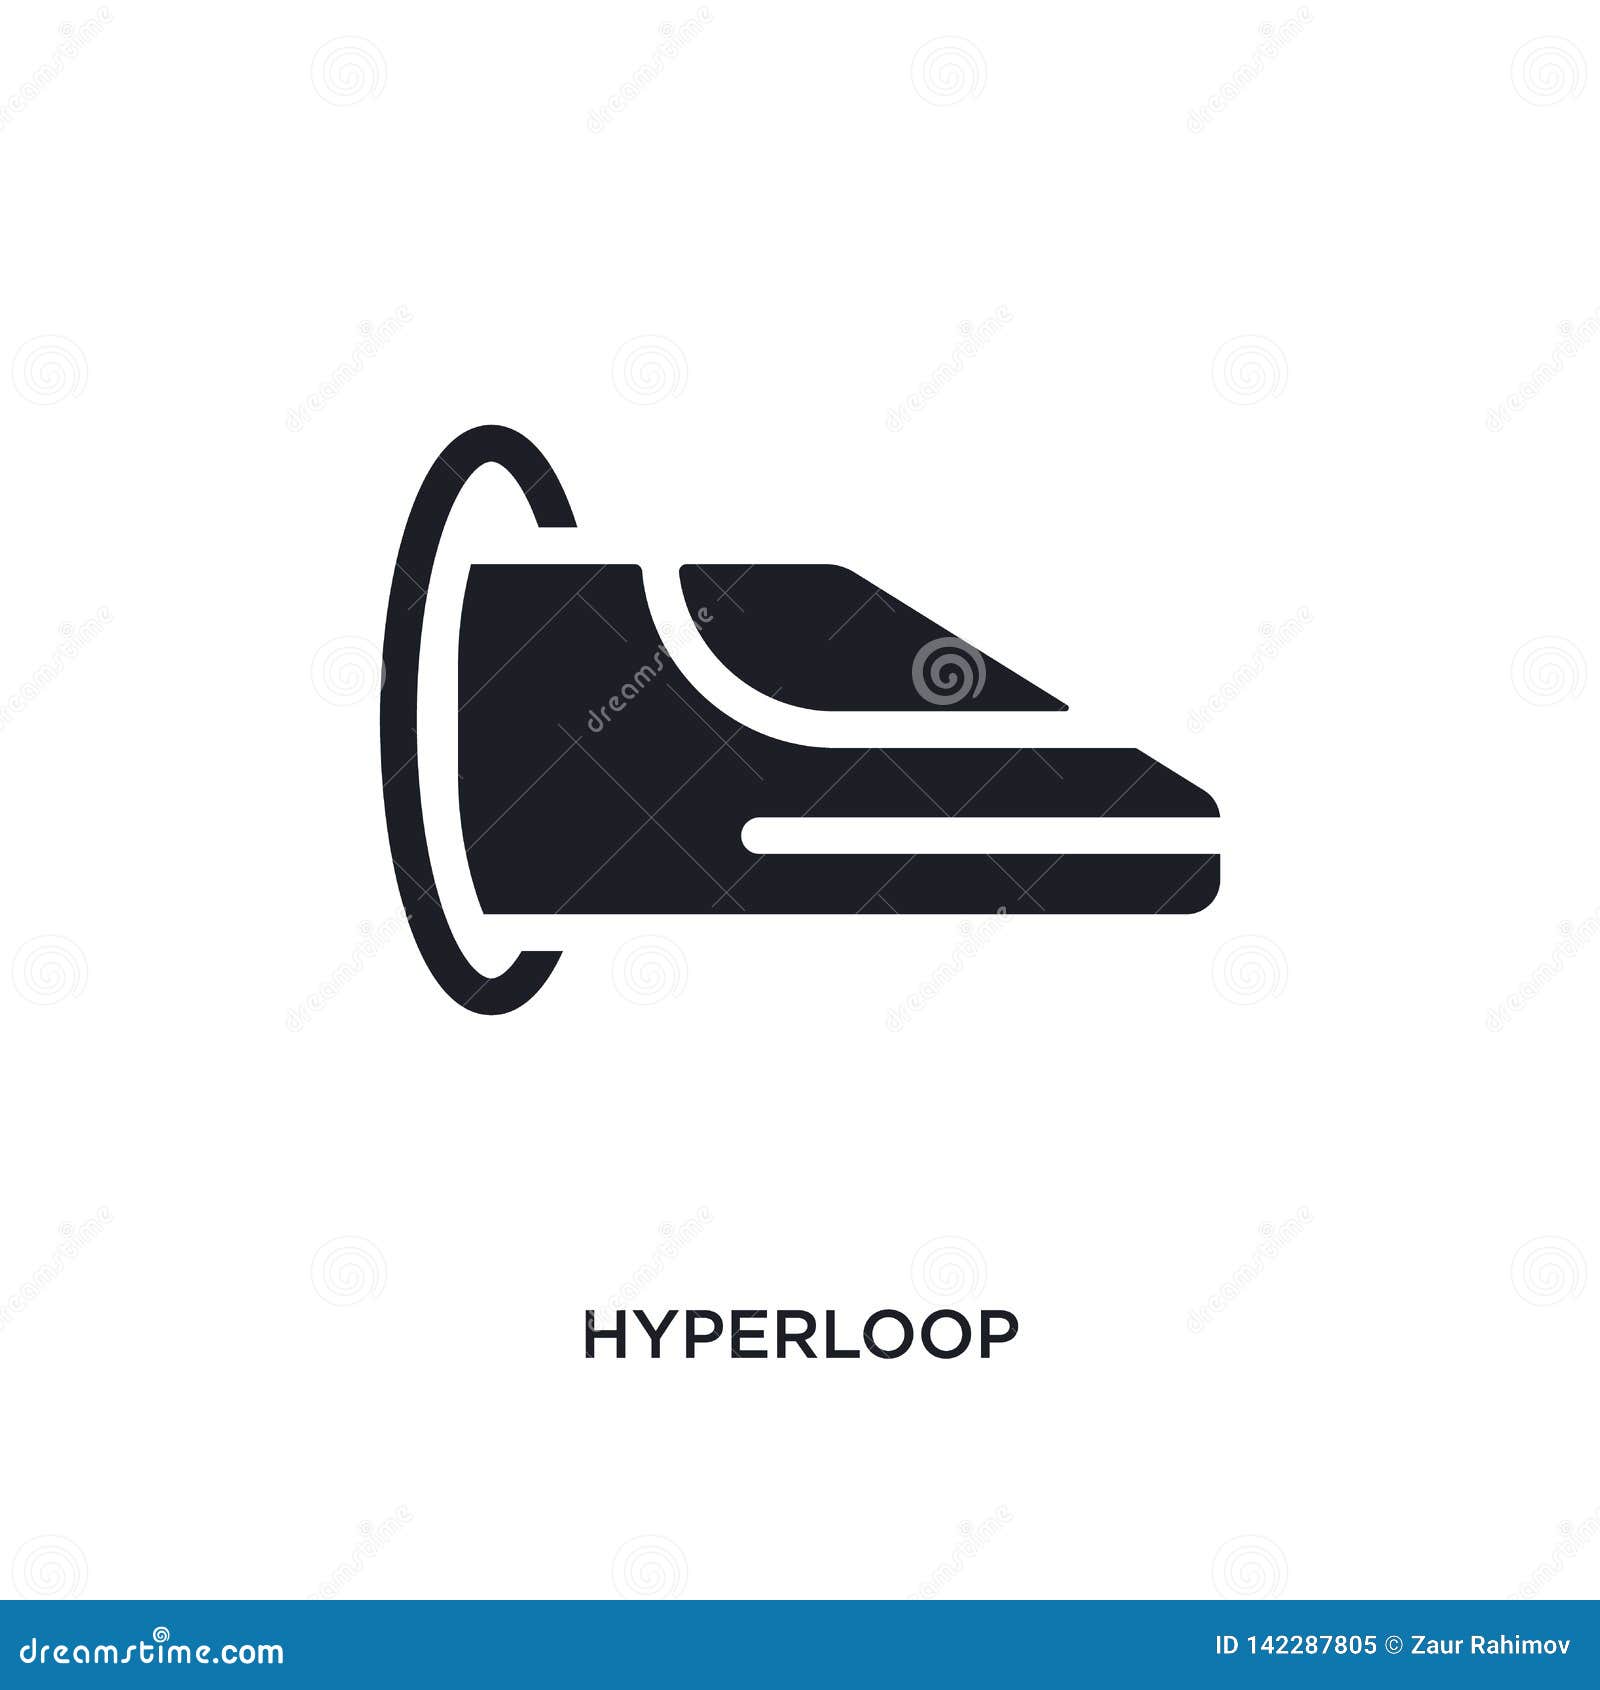 hyperloop  icon. simple   from artificial intellegence concept icons. hyperloop editable logo sign